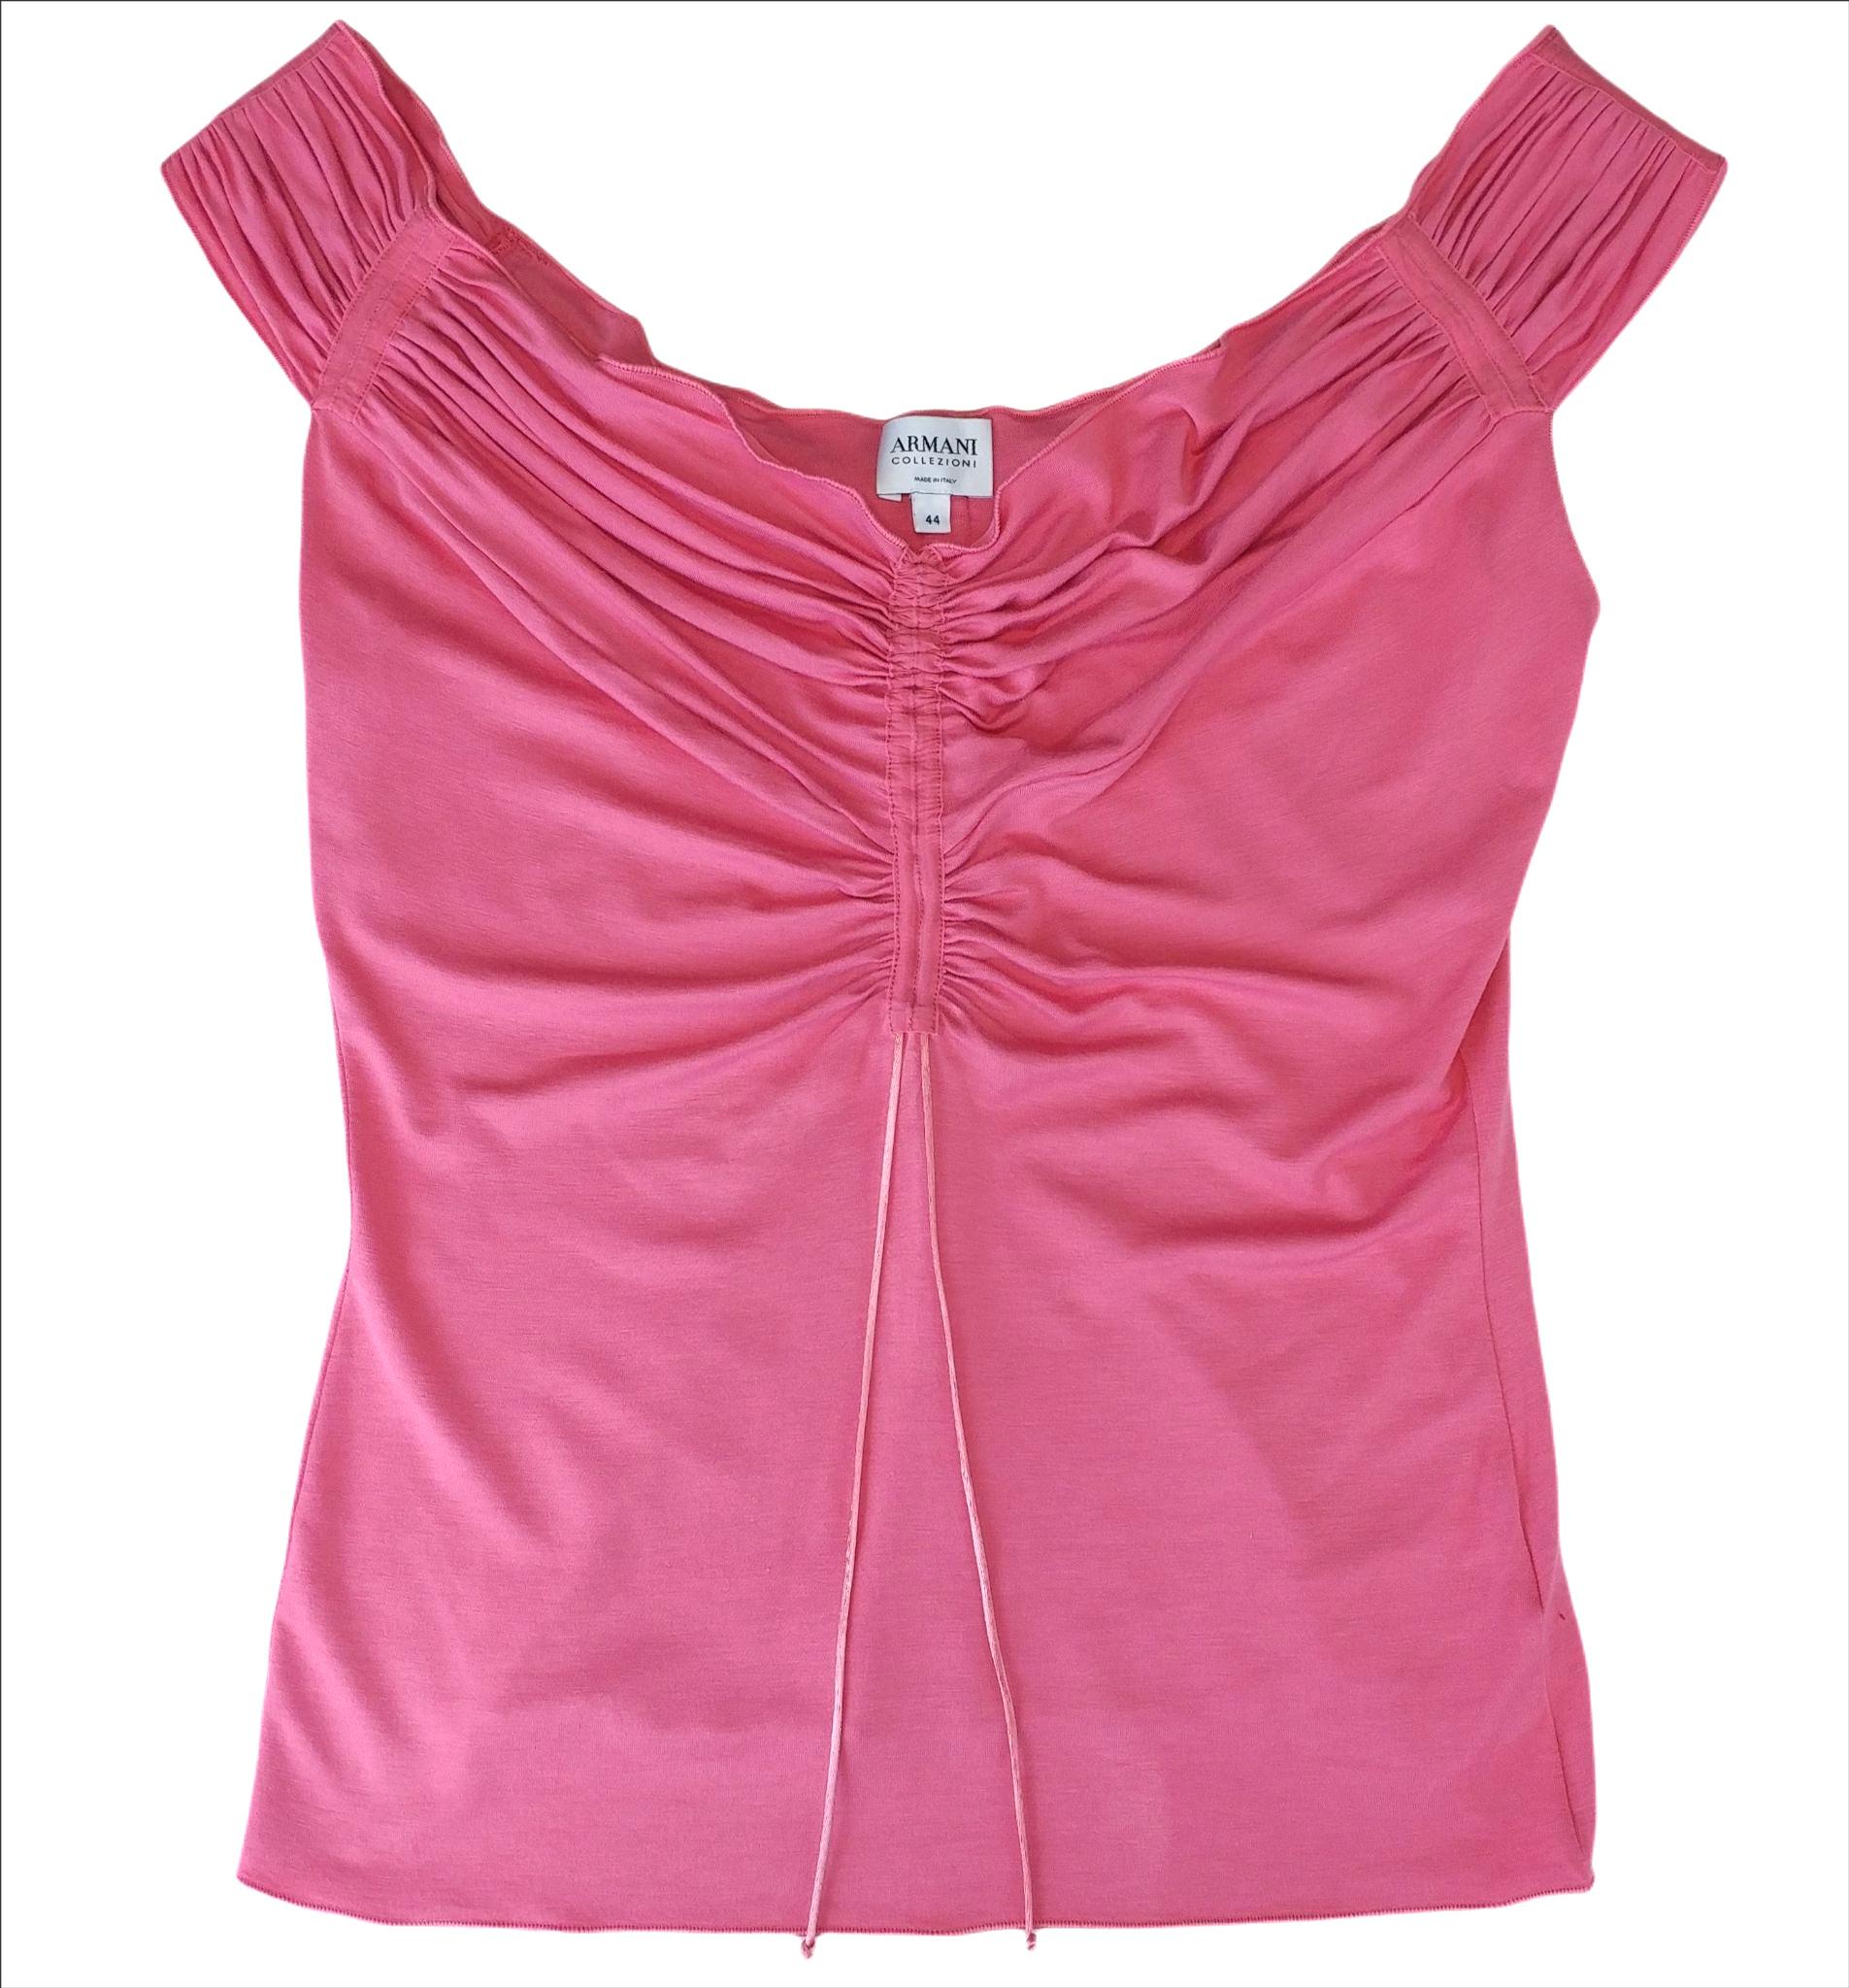 This is a classic piece from Armani: a sleeveless top made of pink viscose stretch fabric with an off-shoulder neckline featuring a boat collar on the back of the shoulders. Refined details and high level finishing, visible in the inside seams, the